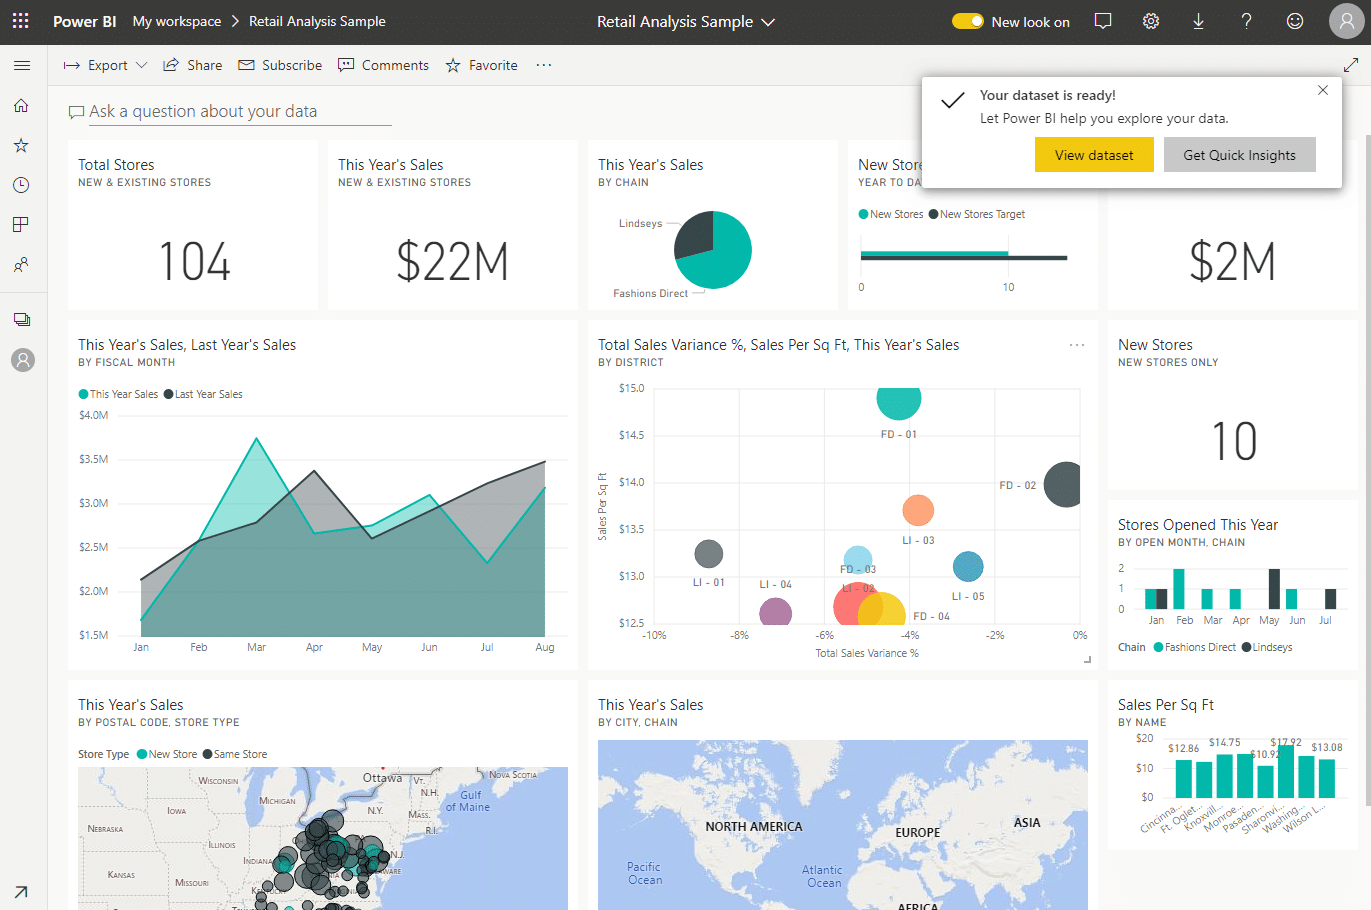 How to Use the Included Sample Data in Power BI (+Examples)